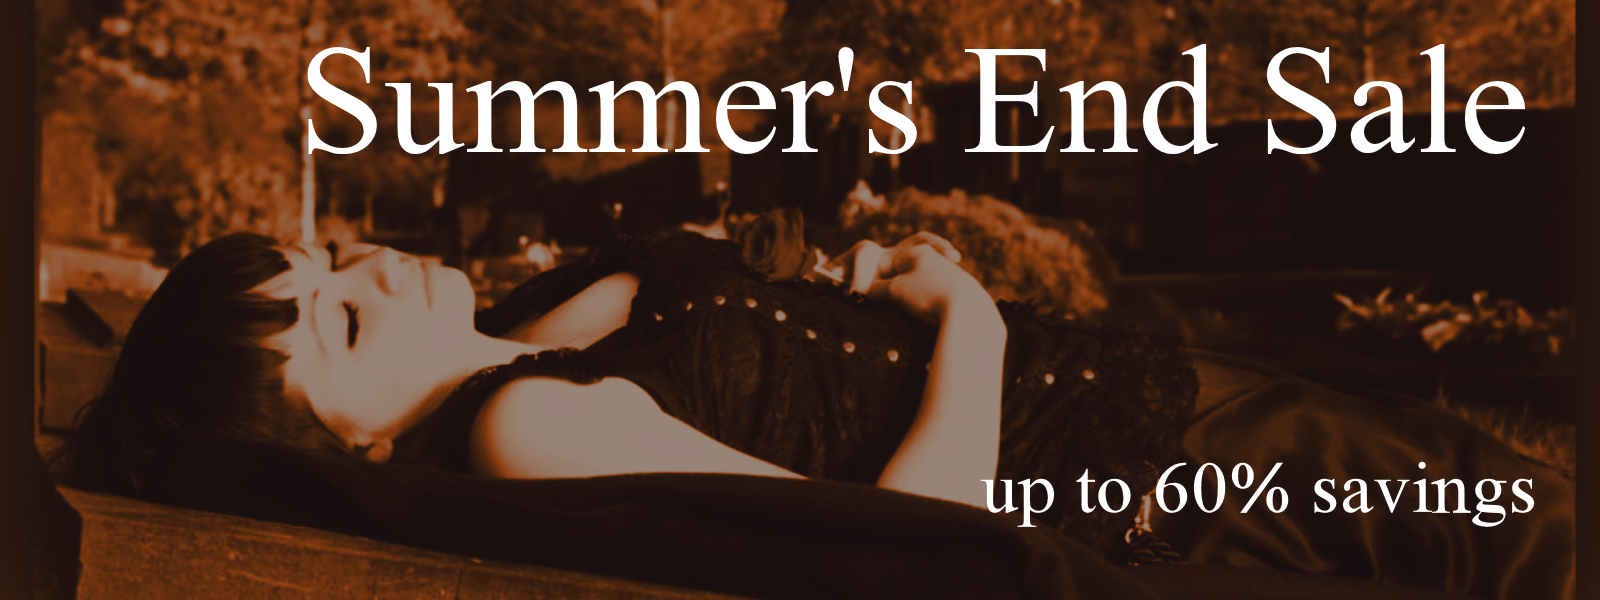 summer's end sale- up to 60% off gothic clothing and accessories